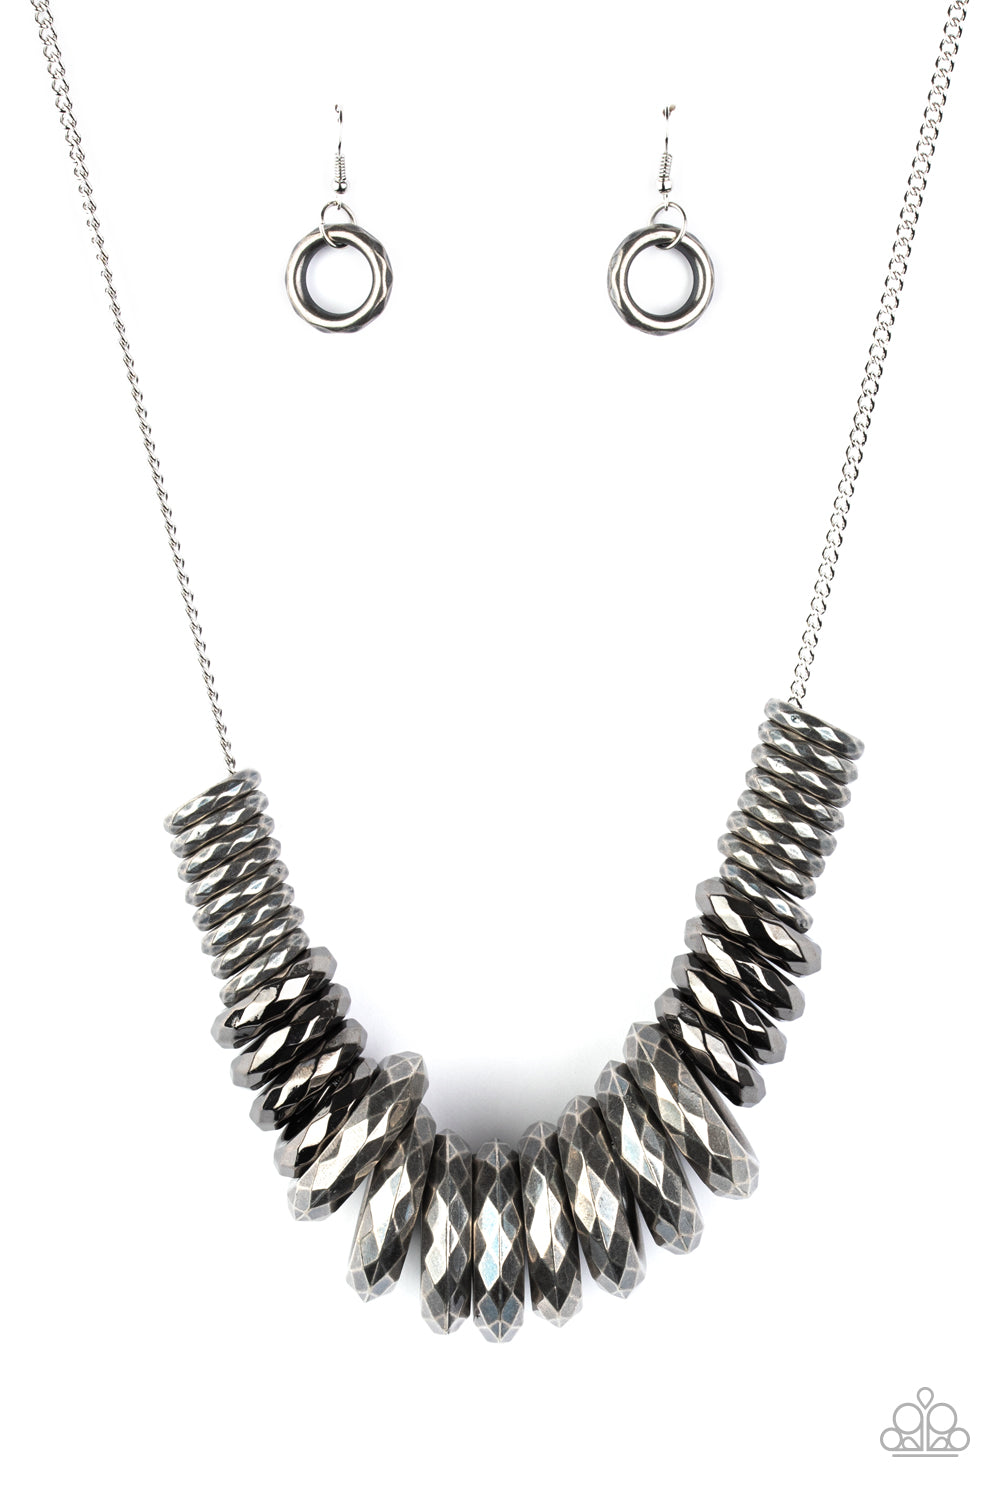 Paparazzi Haute Hardware - Silver Necklace - A Finishing Touch Jewelry